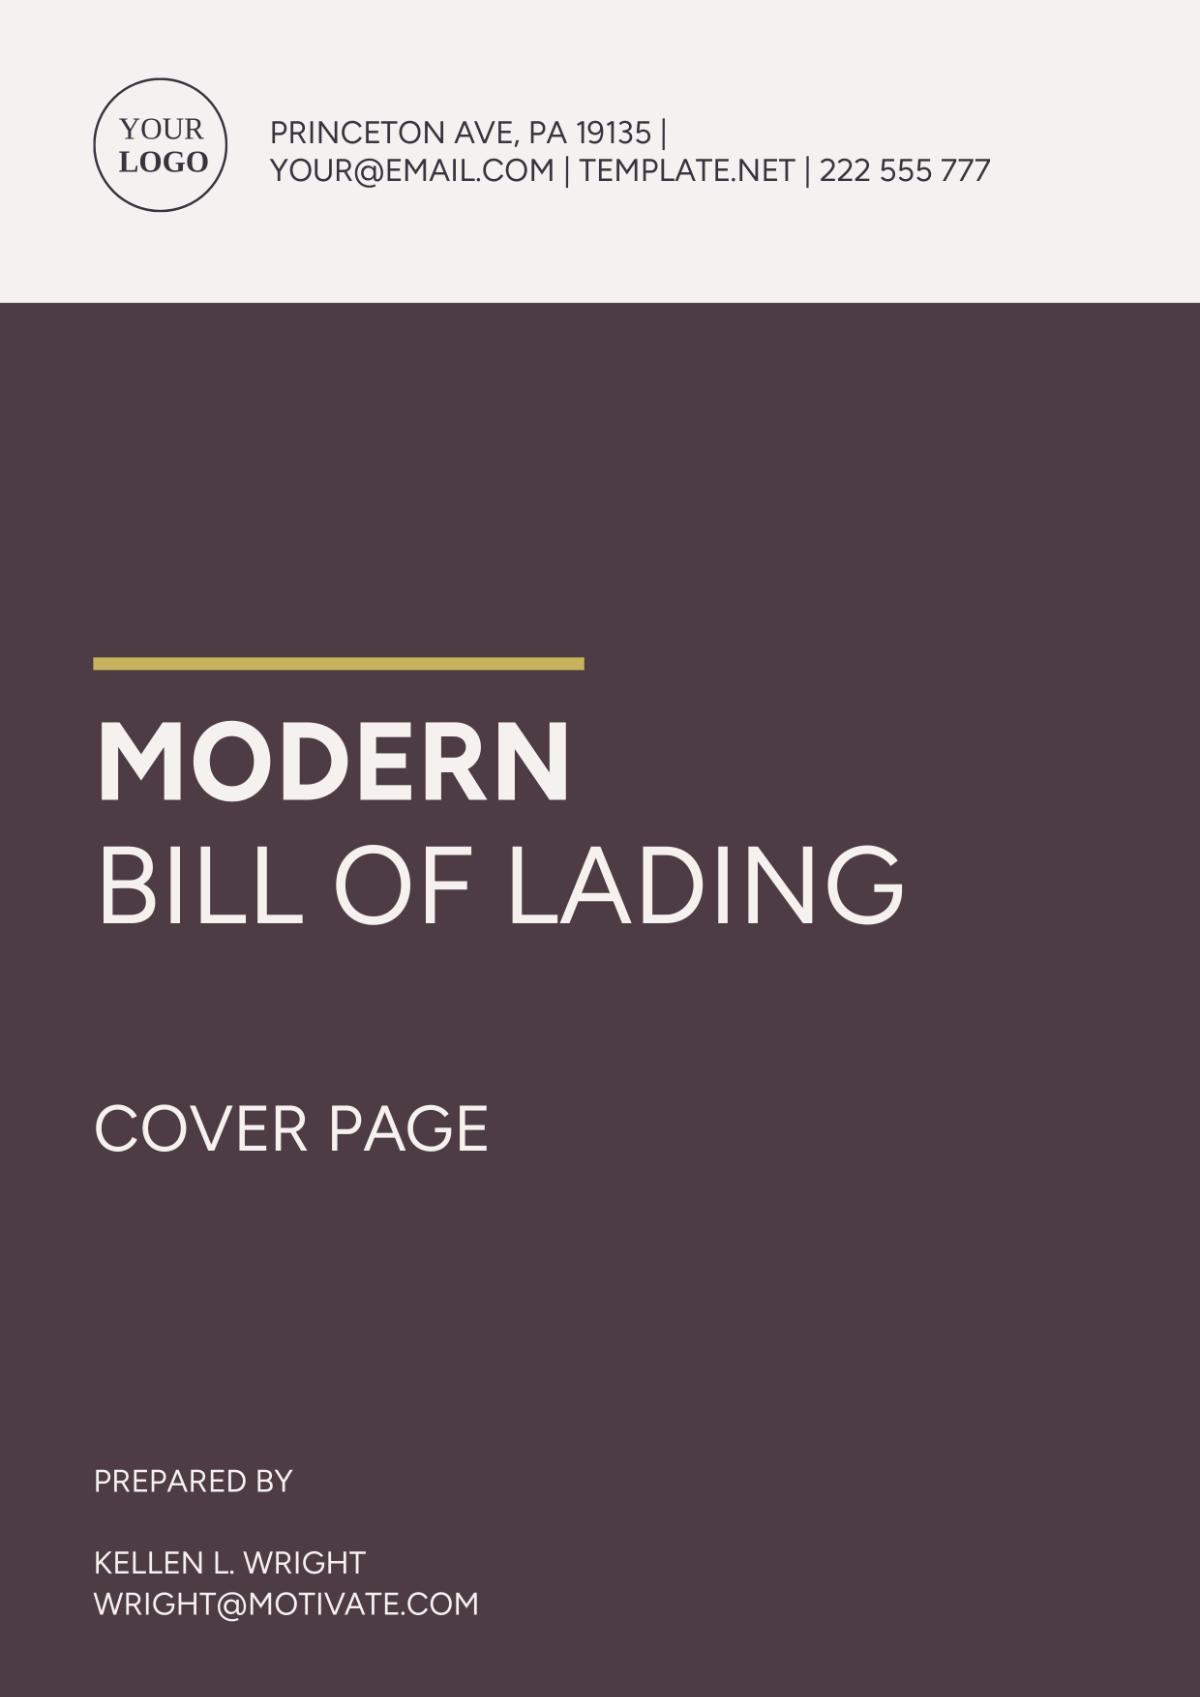 Modern Bill of Lading Cover Page Template